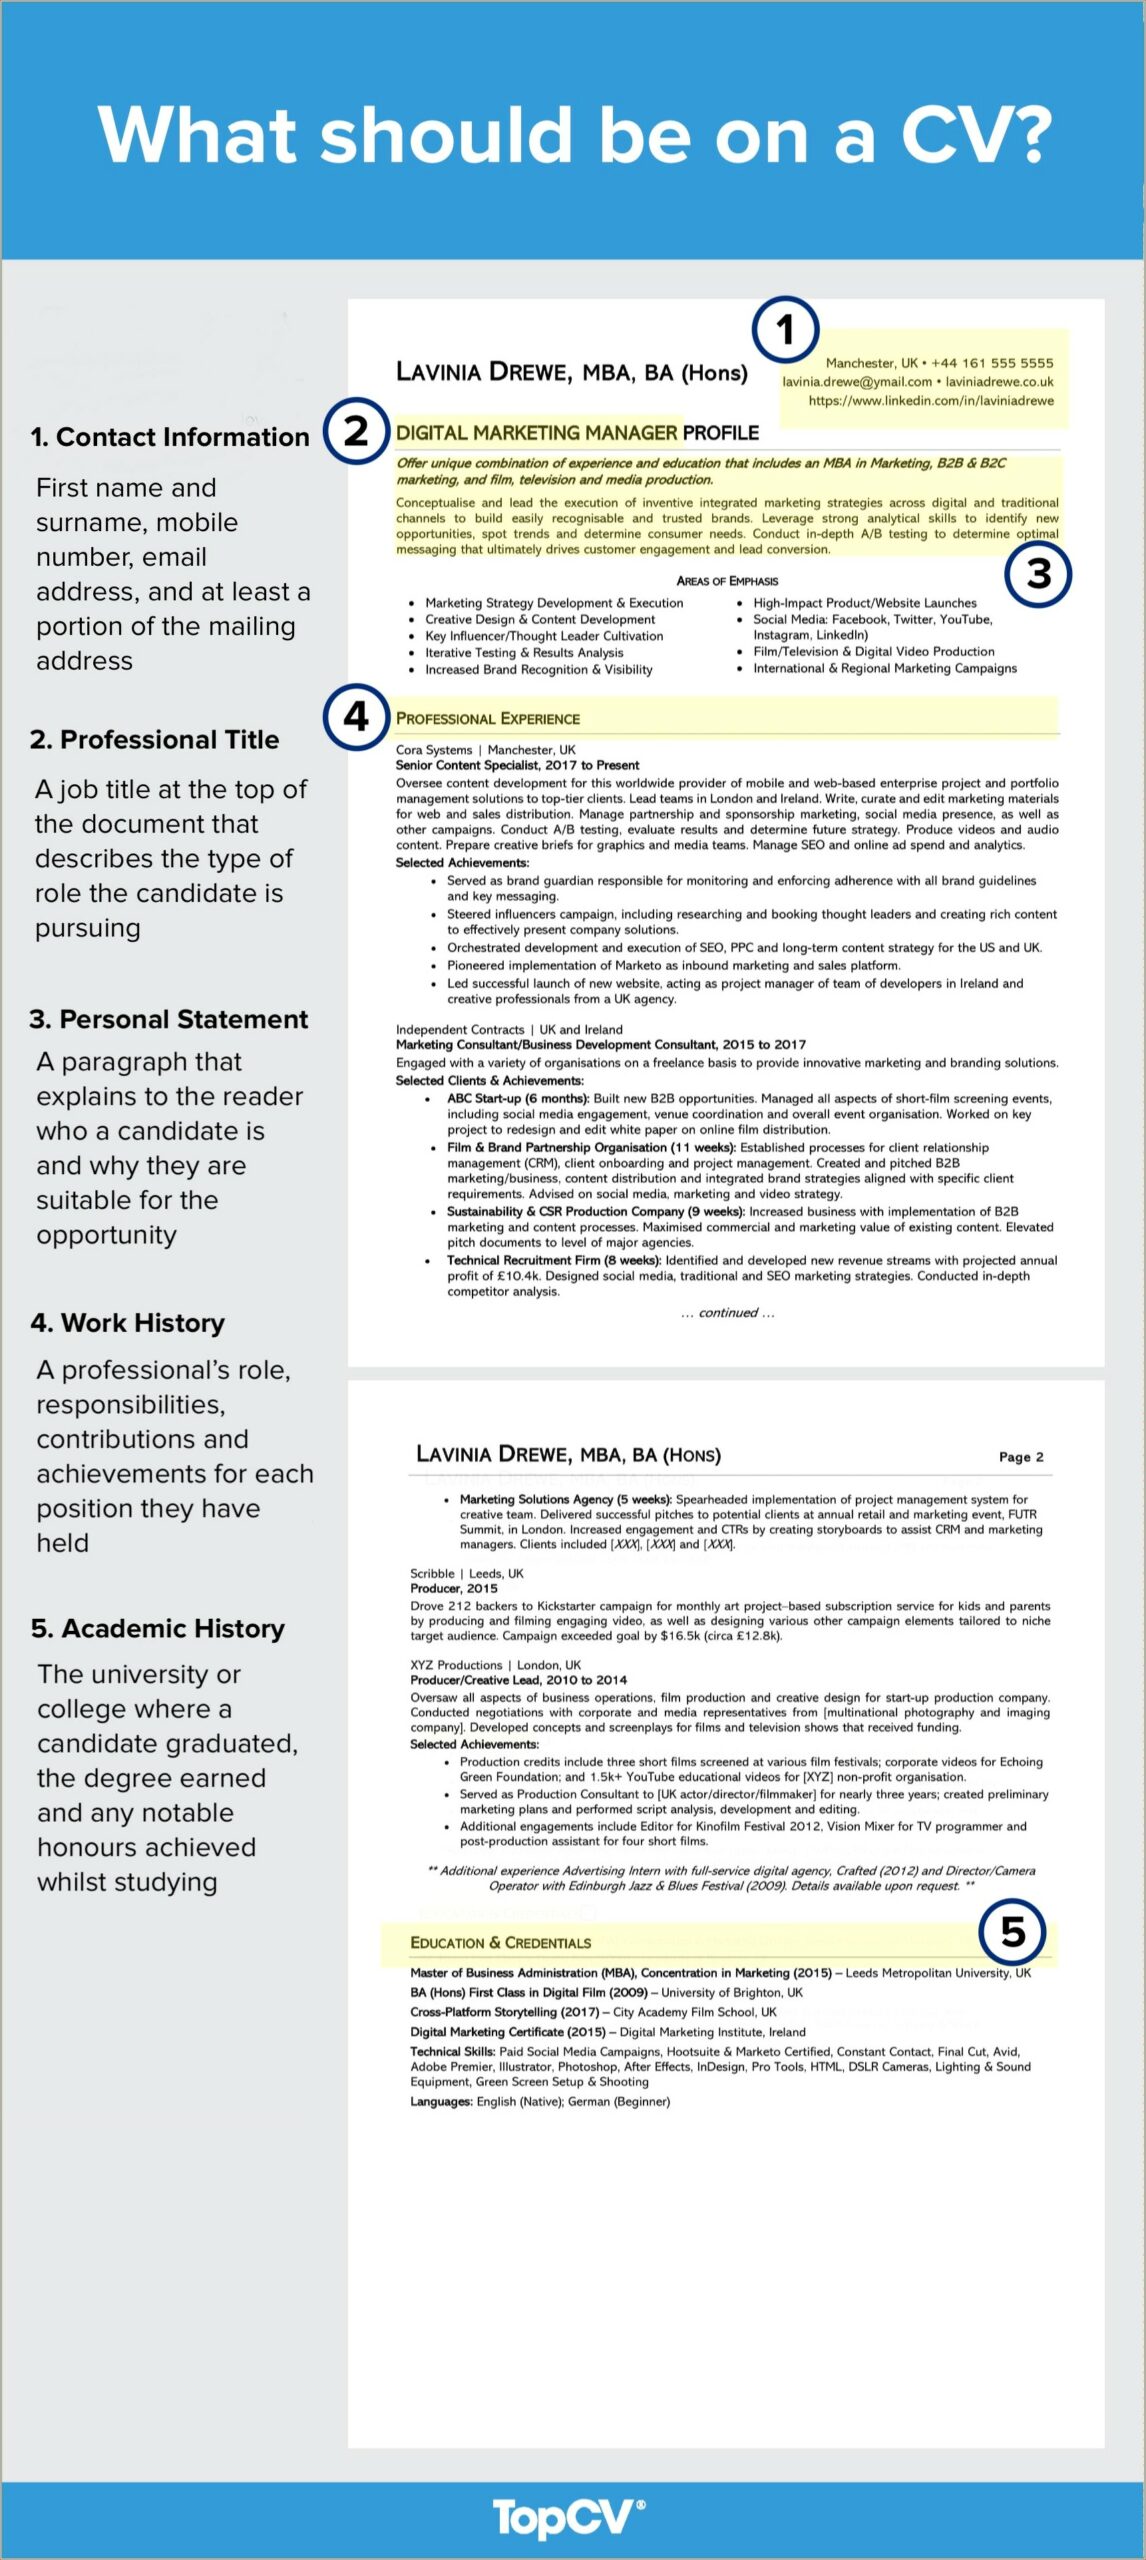 Academic Titles That Are Good On Your Resume